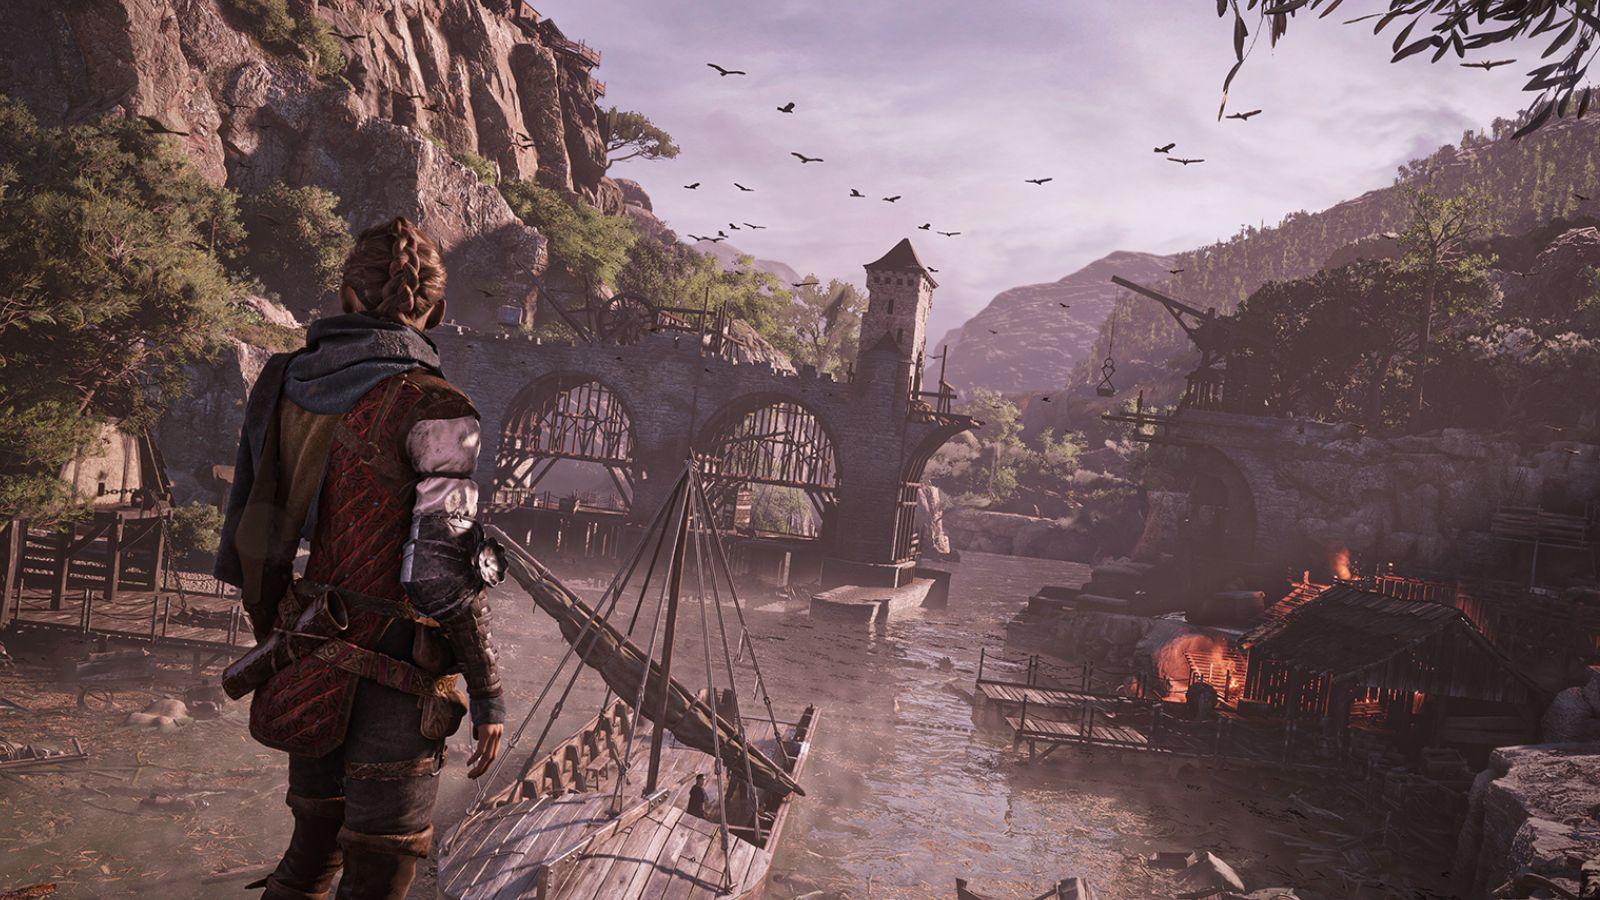 Microsoft Xbox Game Pass to Get Chivalry 2, A Plague Tale: Requiem